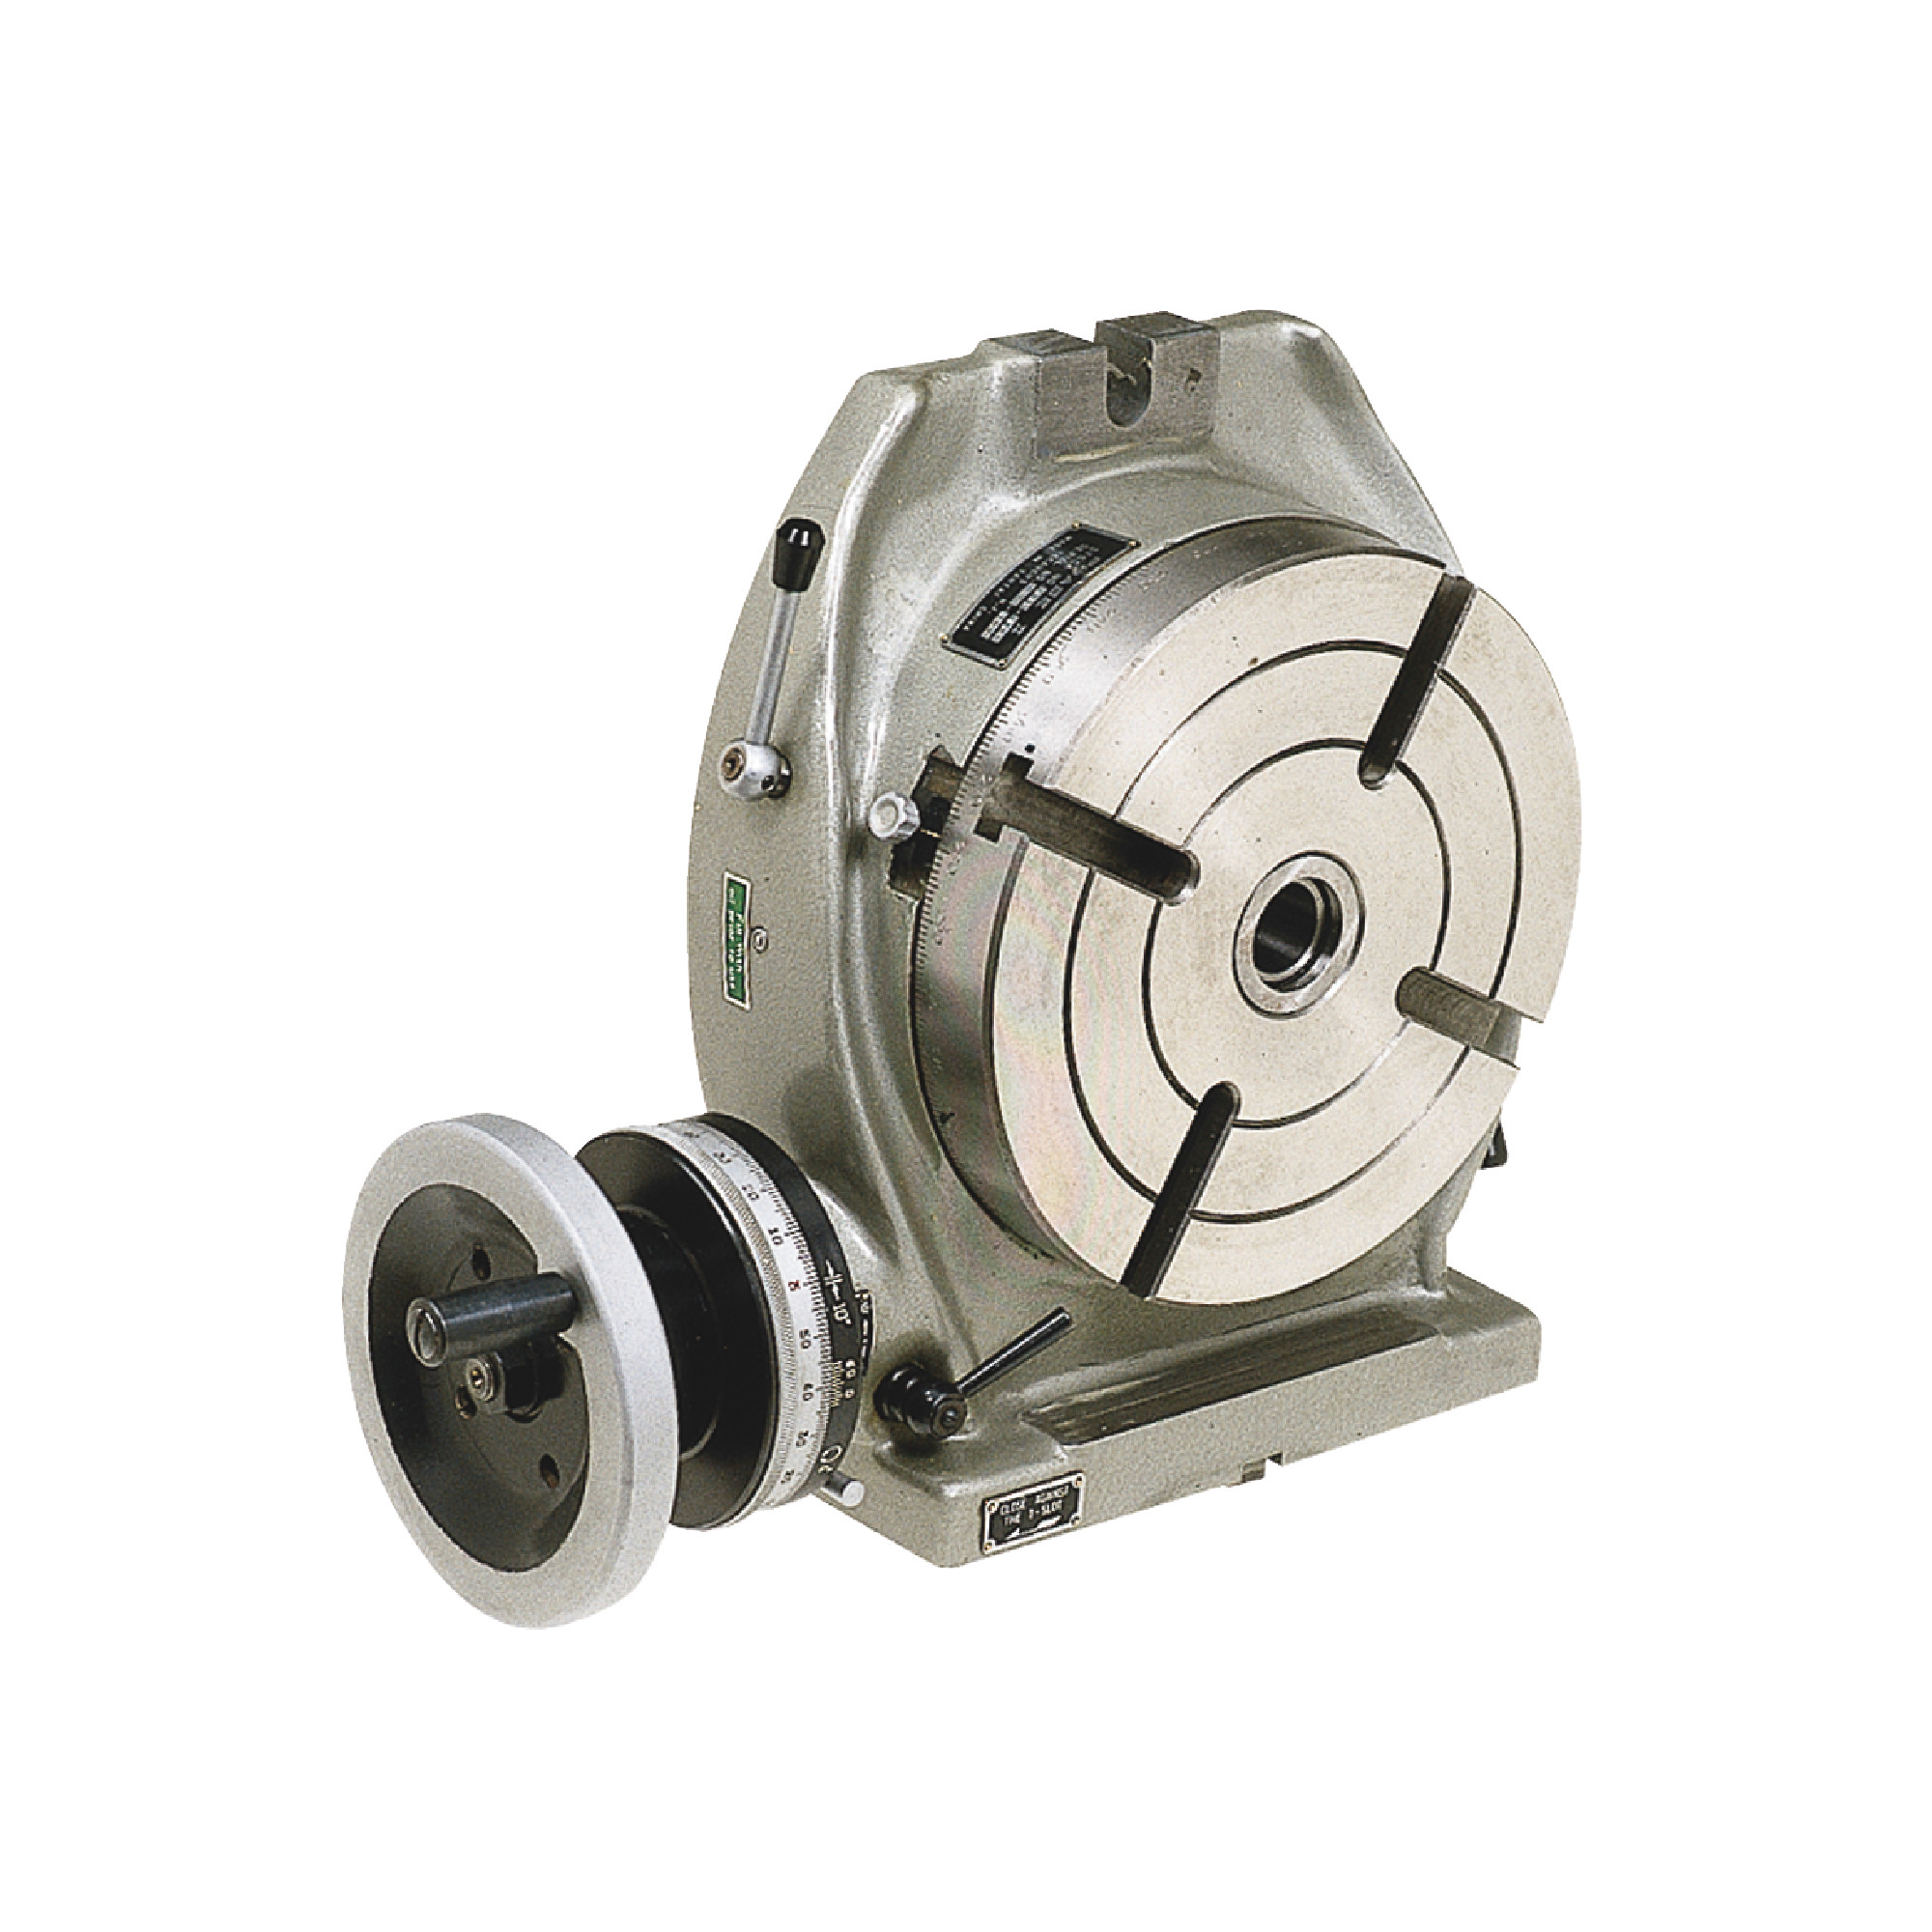 Precision Rotary Table